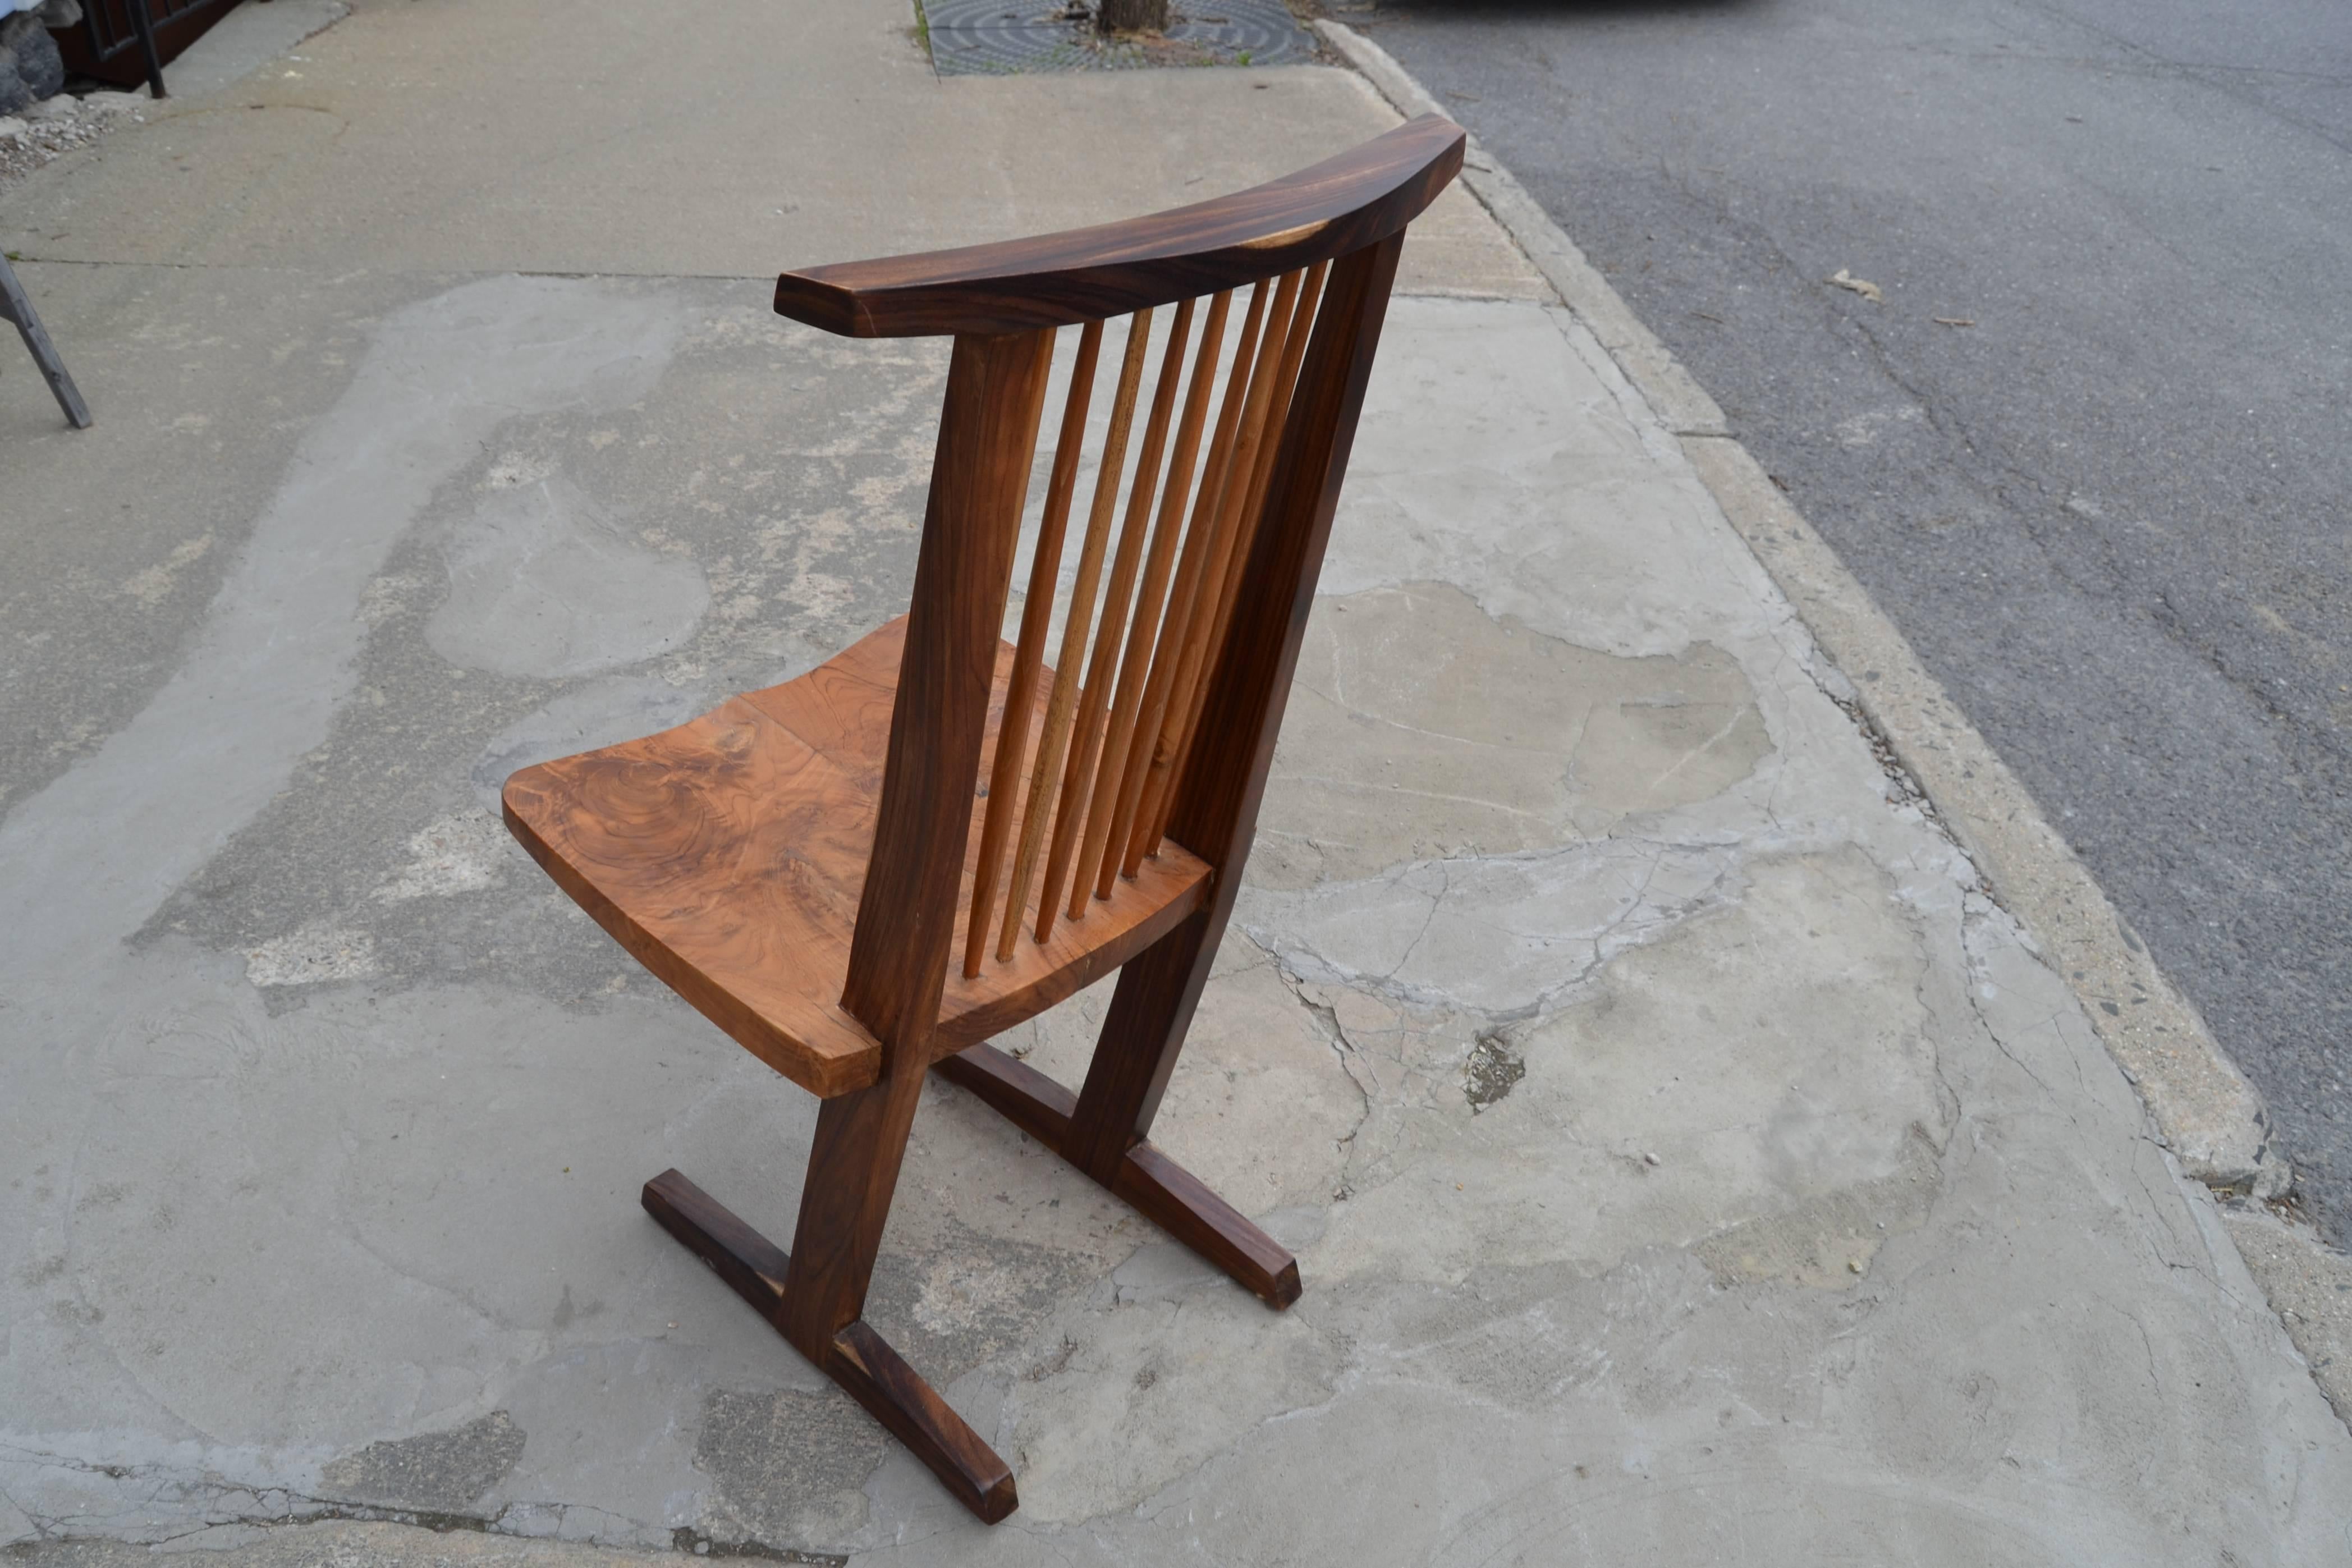 Bench made conoid style chair in the manner of George Nakashima. Burl seat with hickory accent woods.